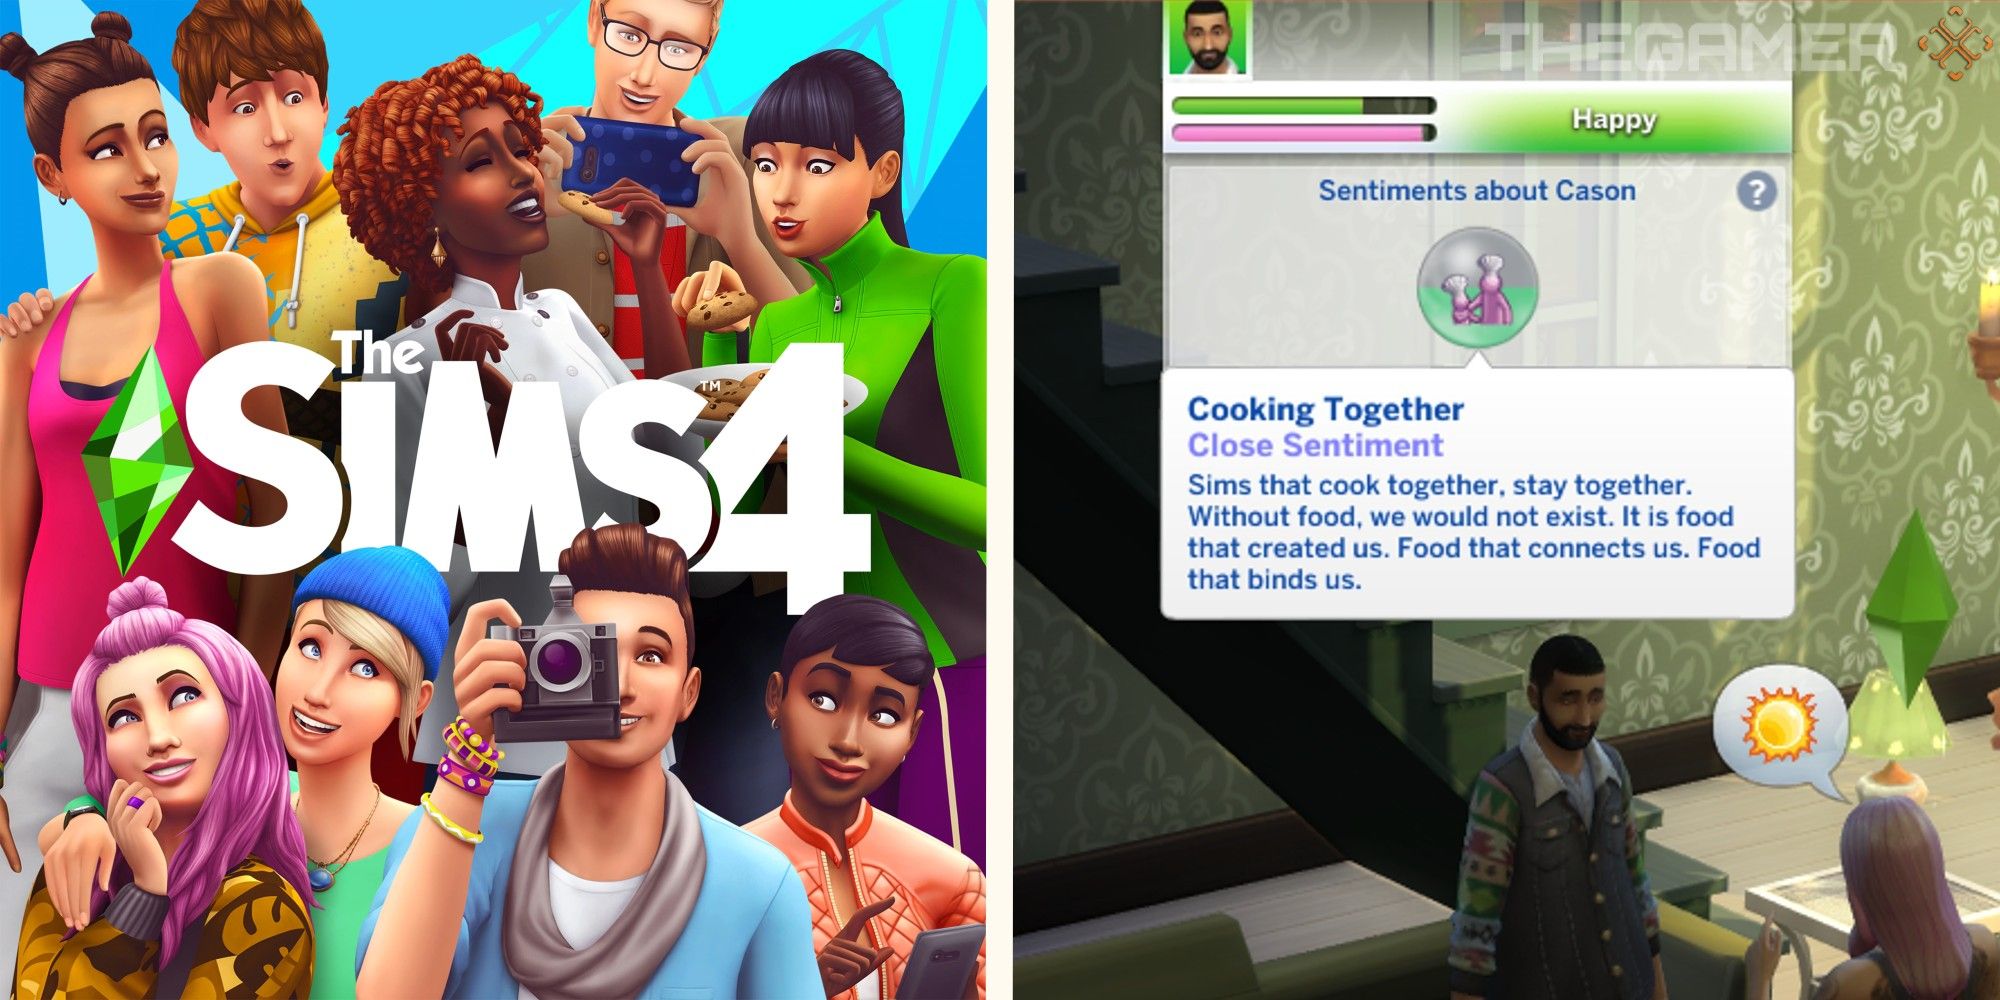 image of sims 4 official art next to image of sim sentiment highlighted